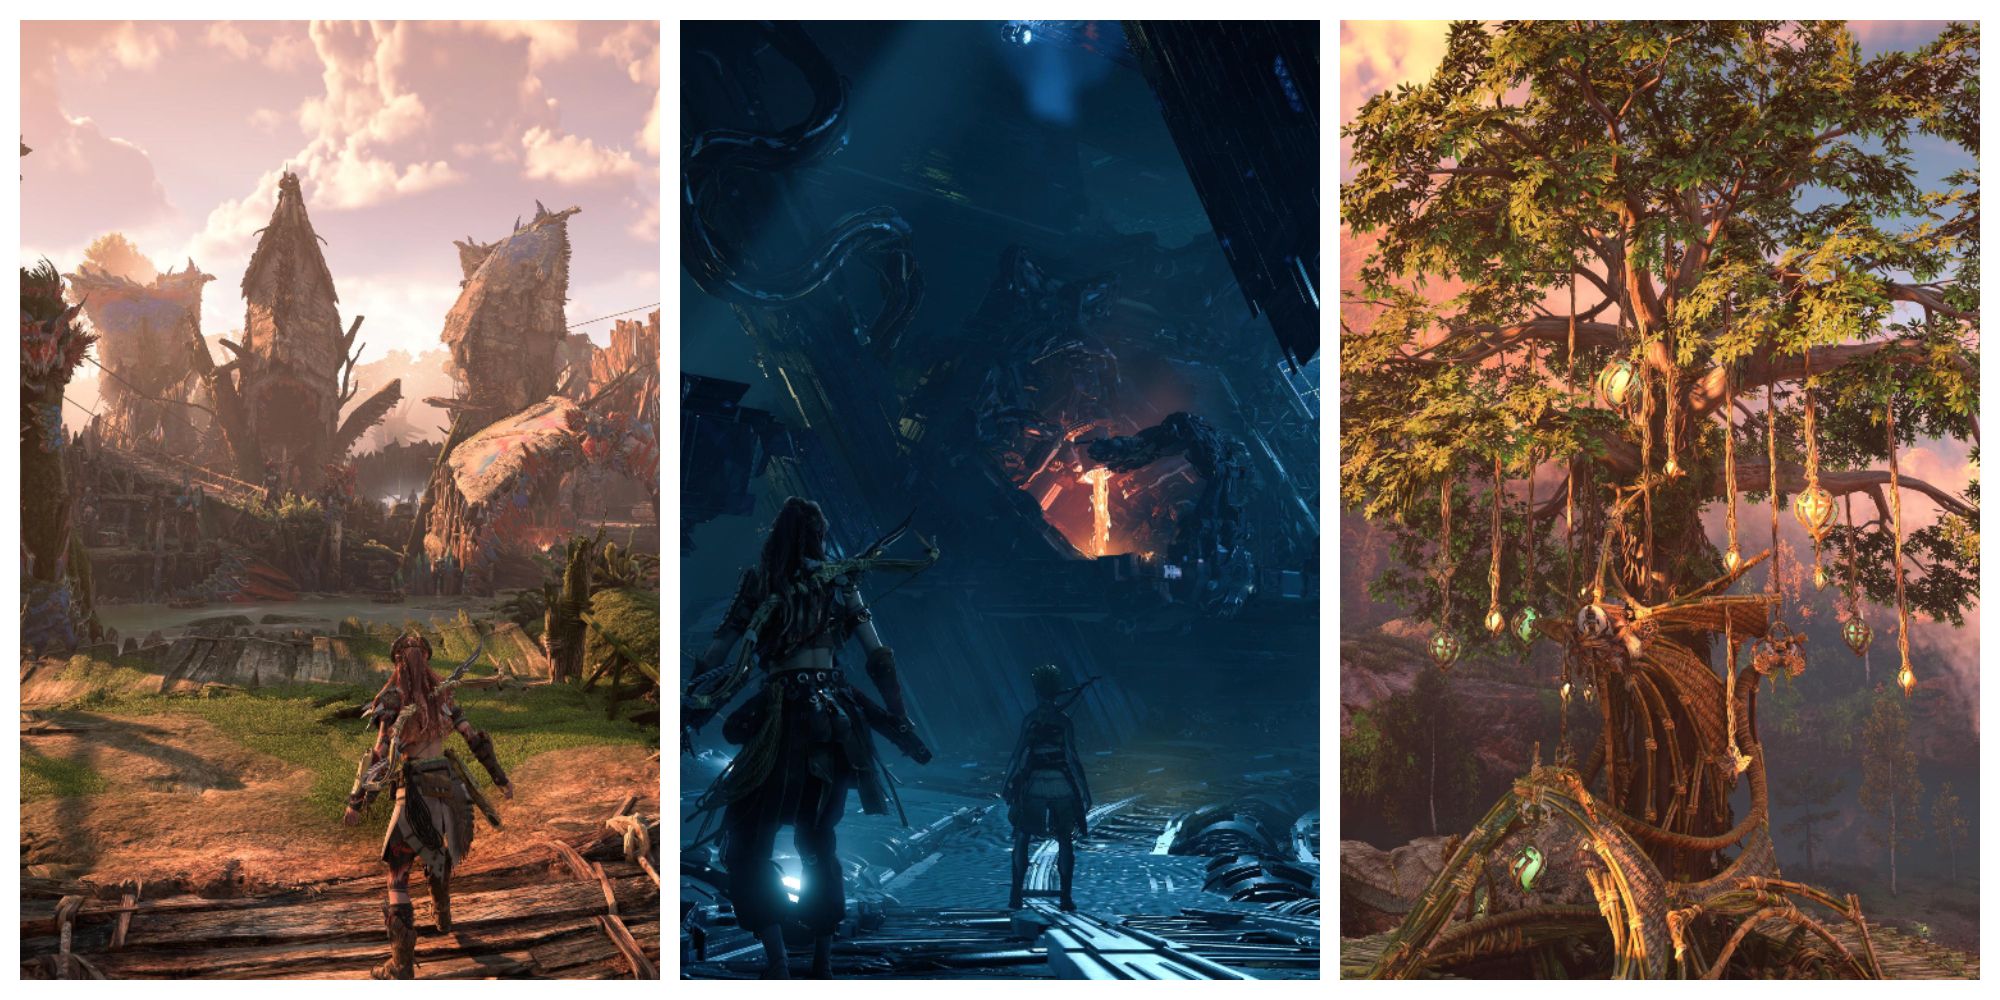 aloy standing at the entrance of a riverside vilage; aloy standing in a dark, metallic chamber with a bright spot in the distance; a large tree with crystal lanterns hanging from the branches